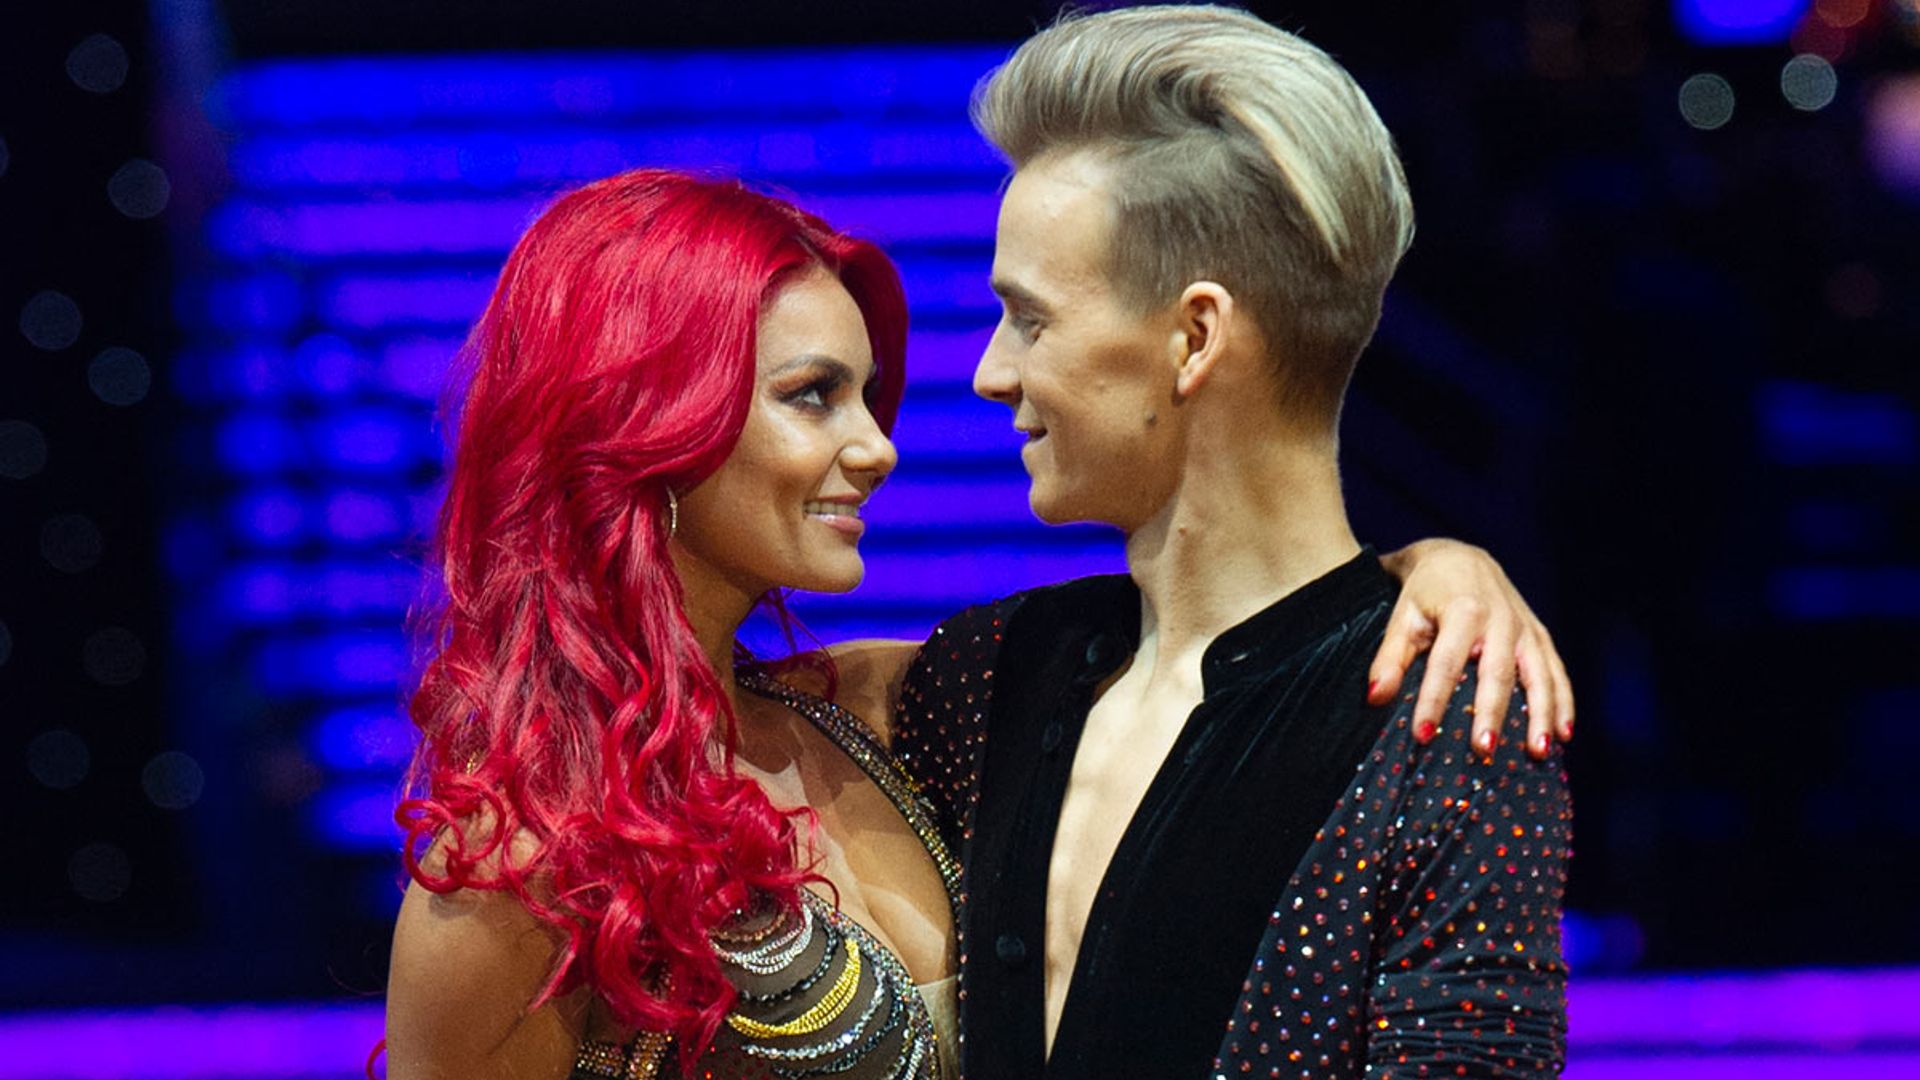 Joe-Sugg-Dianne-Buswell-Strictly